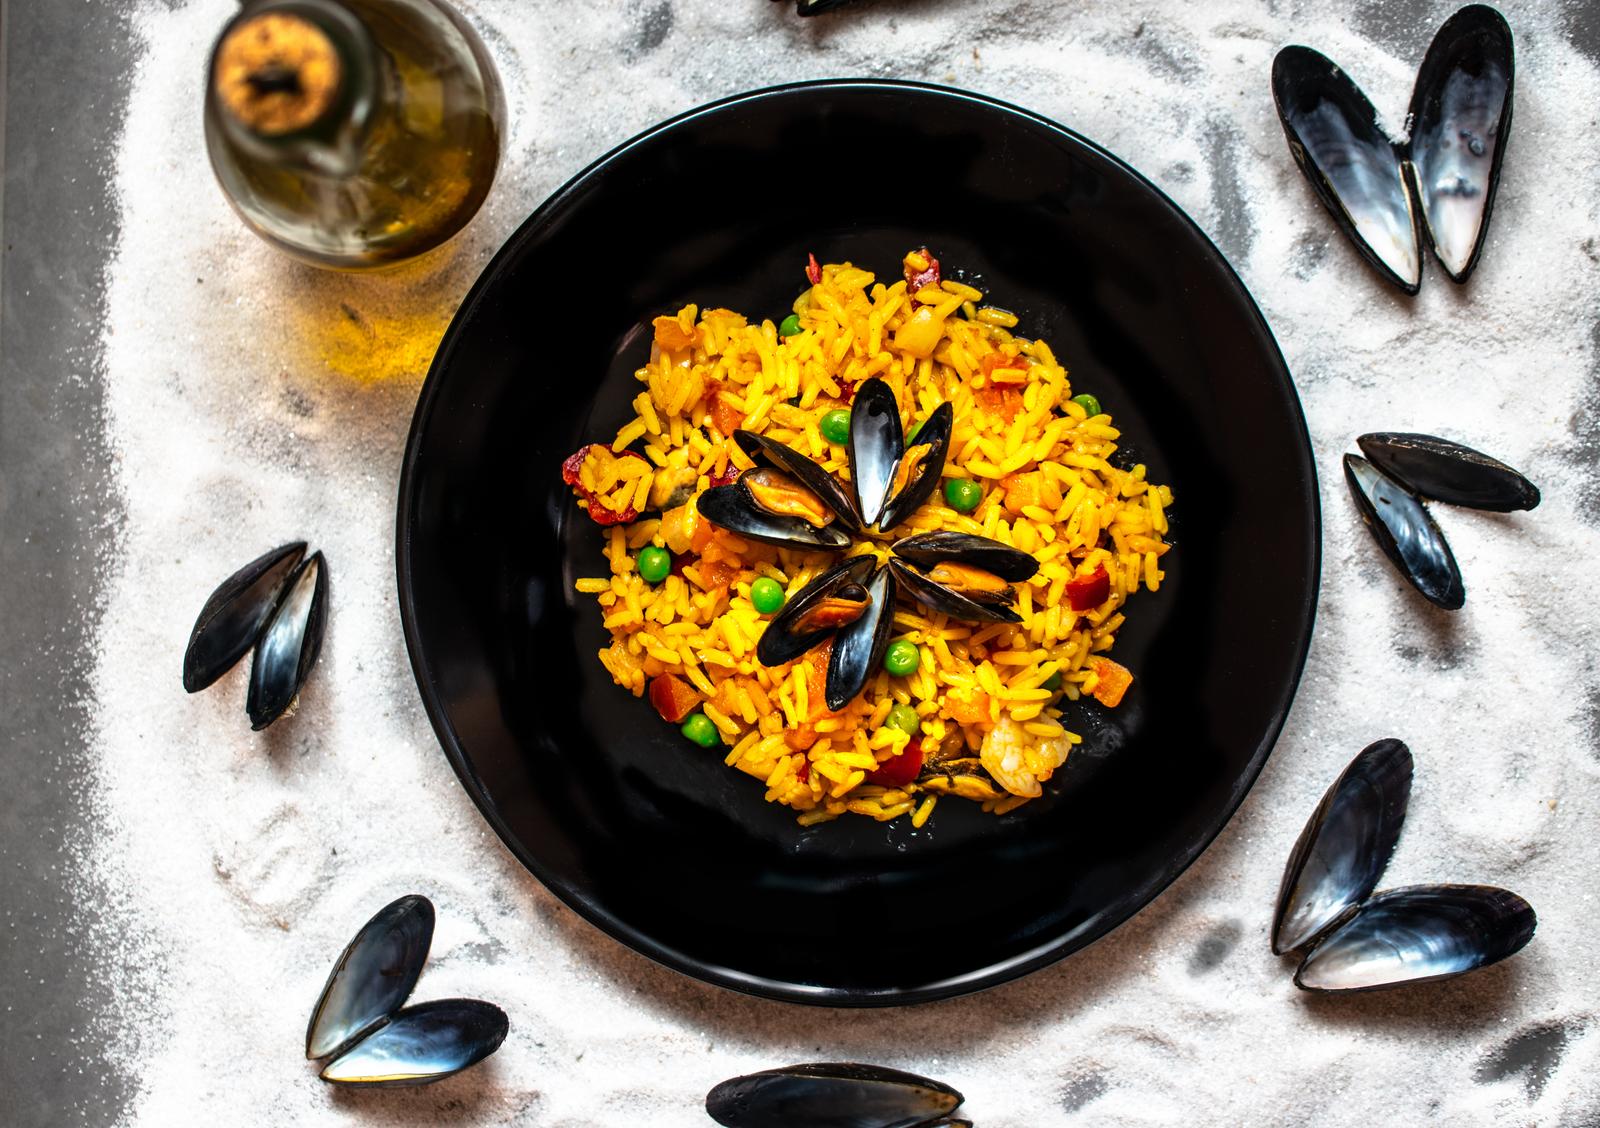 Can You Actually Get at Least 15/20 on This Quiz That’s All About Europe? Paella